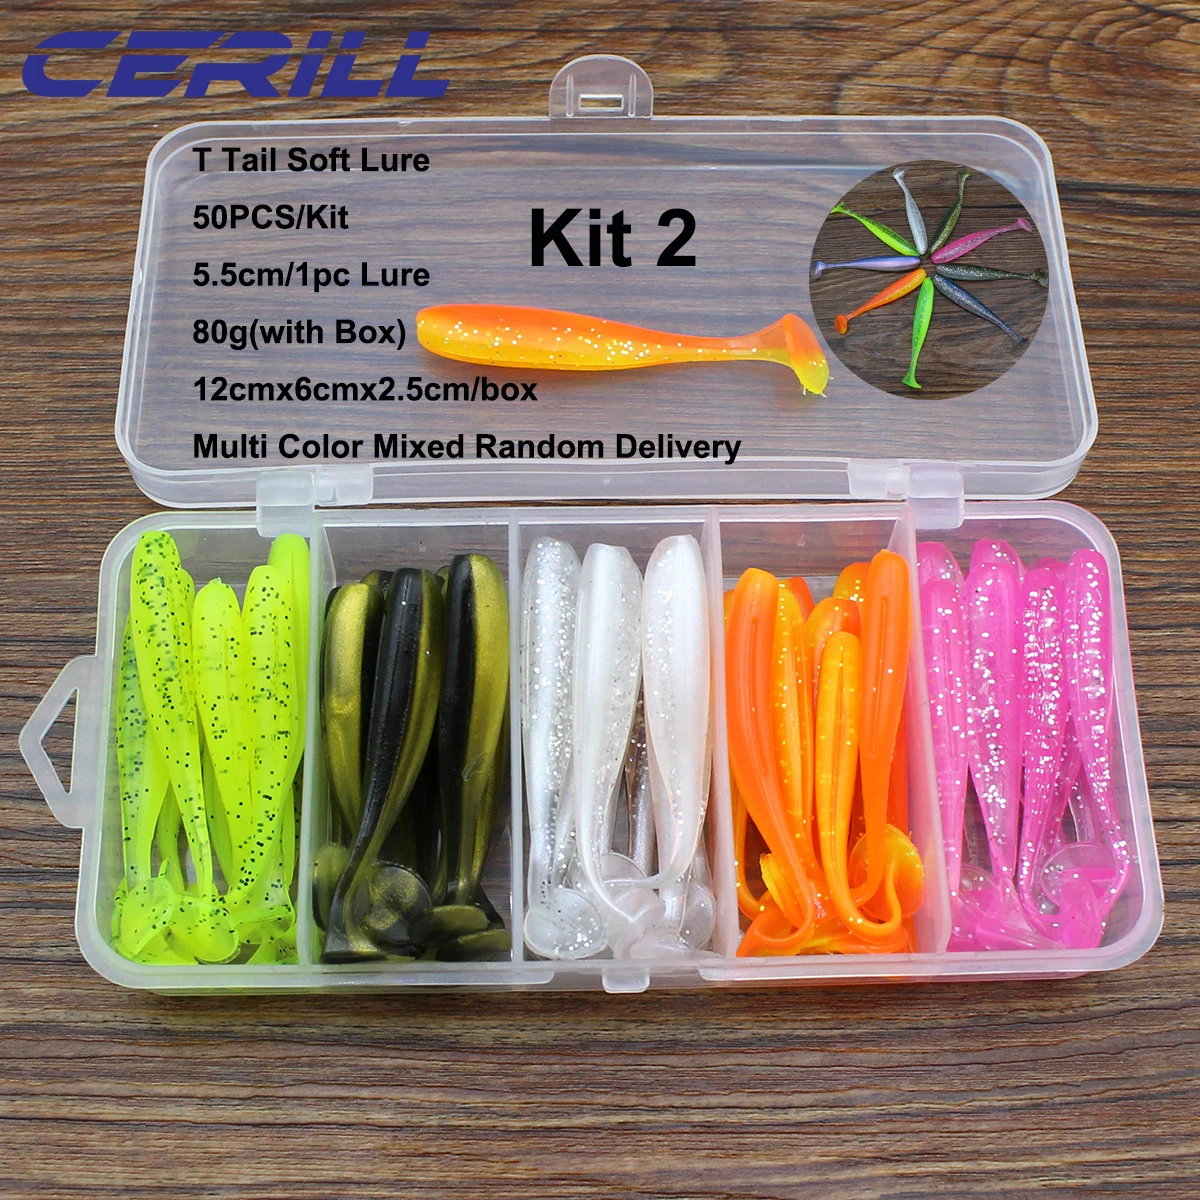 40pcs/Box Silicone Lure Rubber Worm Grubs T-Tail Pike Crochet Kit